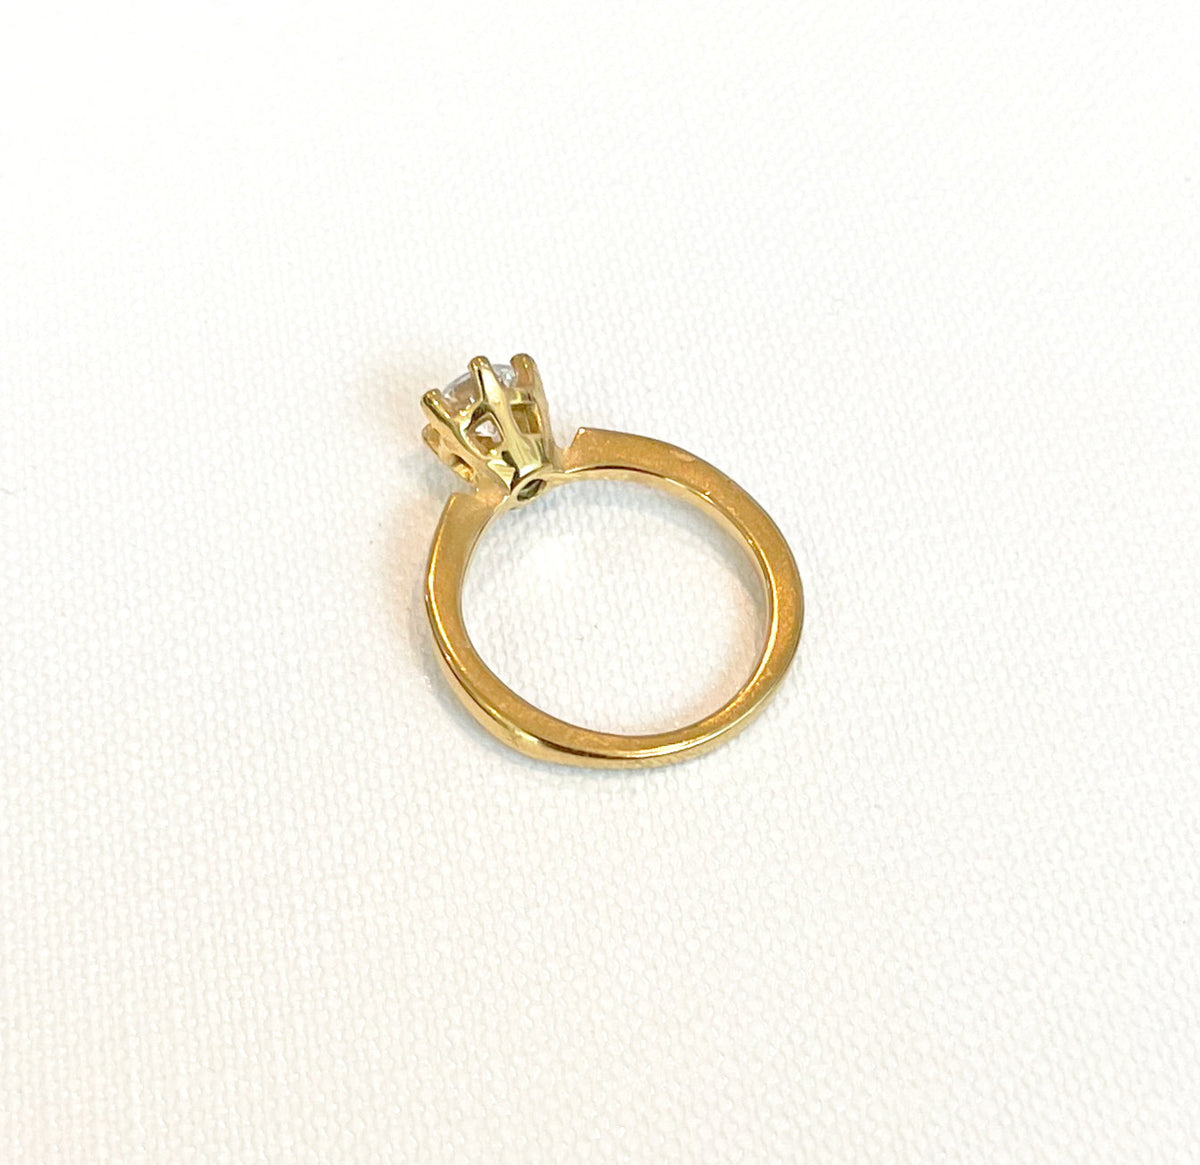 18K GOLD 6 PRONG SOLITAIRE RING - SAMPLE